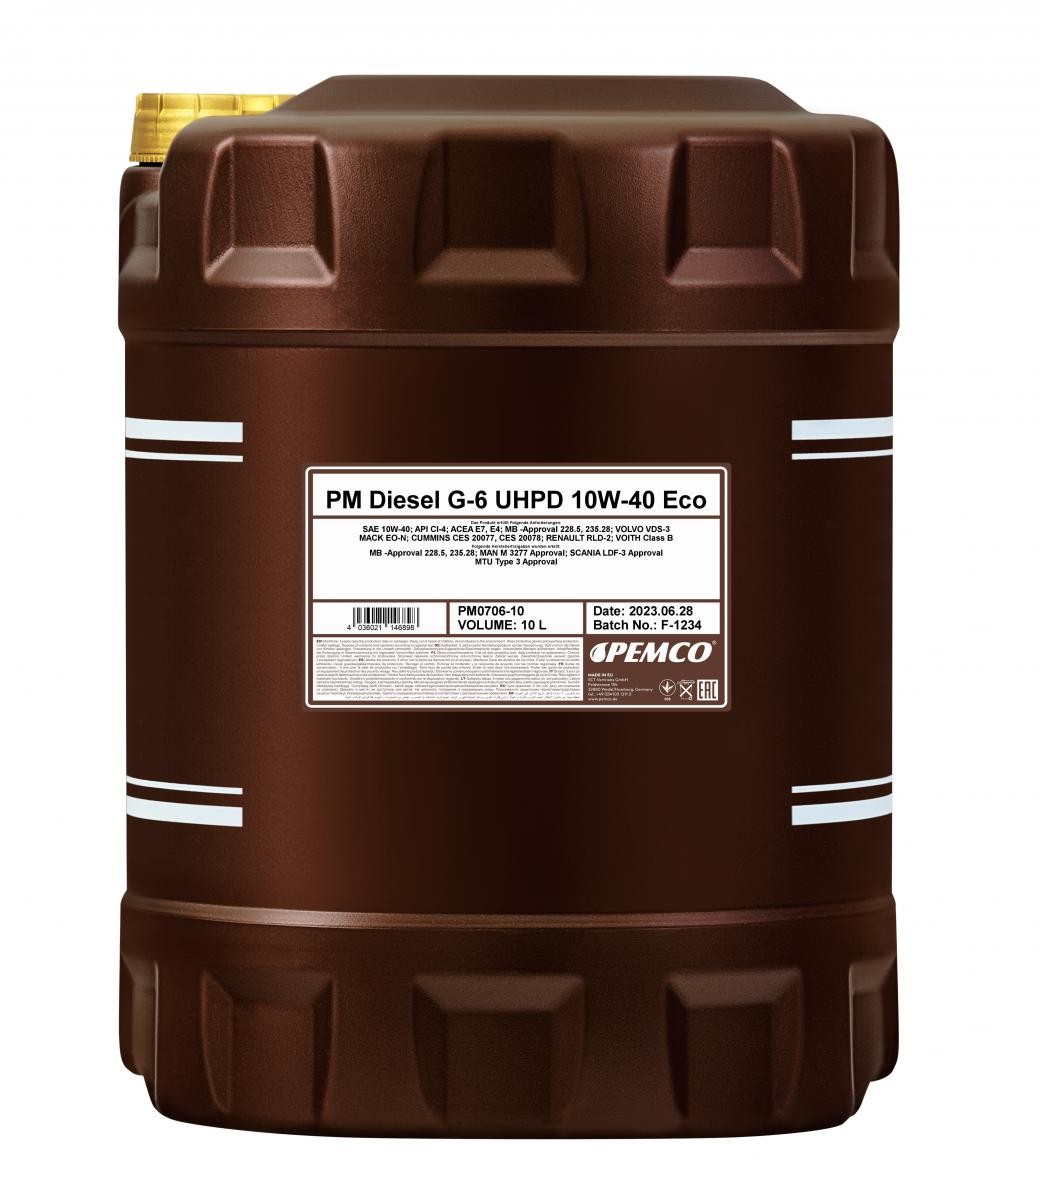 Buy Engine oil PEMCO petrol PM0706-10 Truck UHPD, DIESEL G-6 Eco 10W-40, 10l, Synthetic Oil